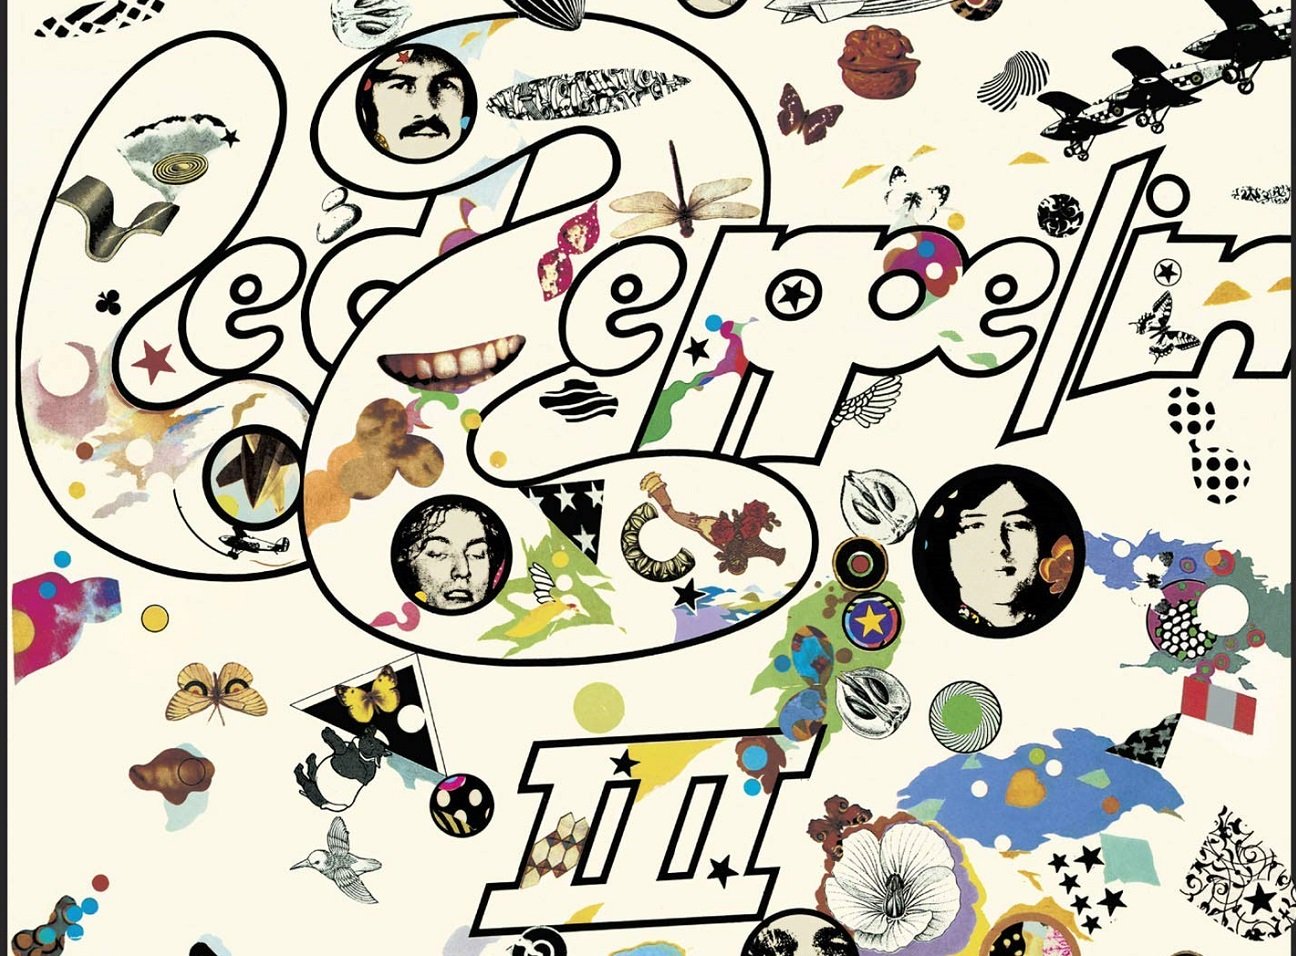 A close up of the collage on the cover of 'Led Zeppelin III'